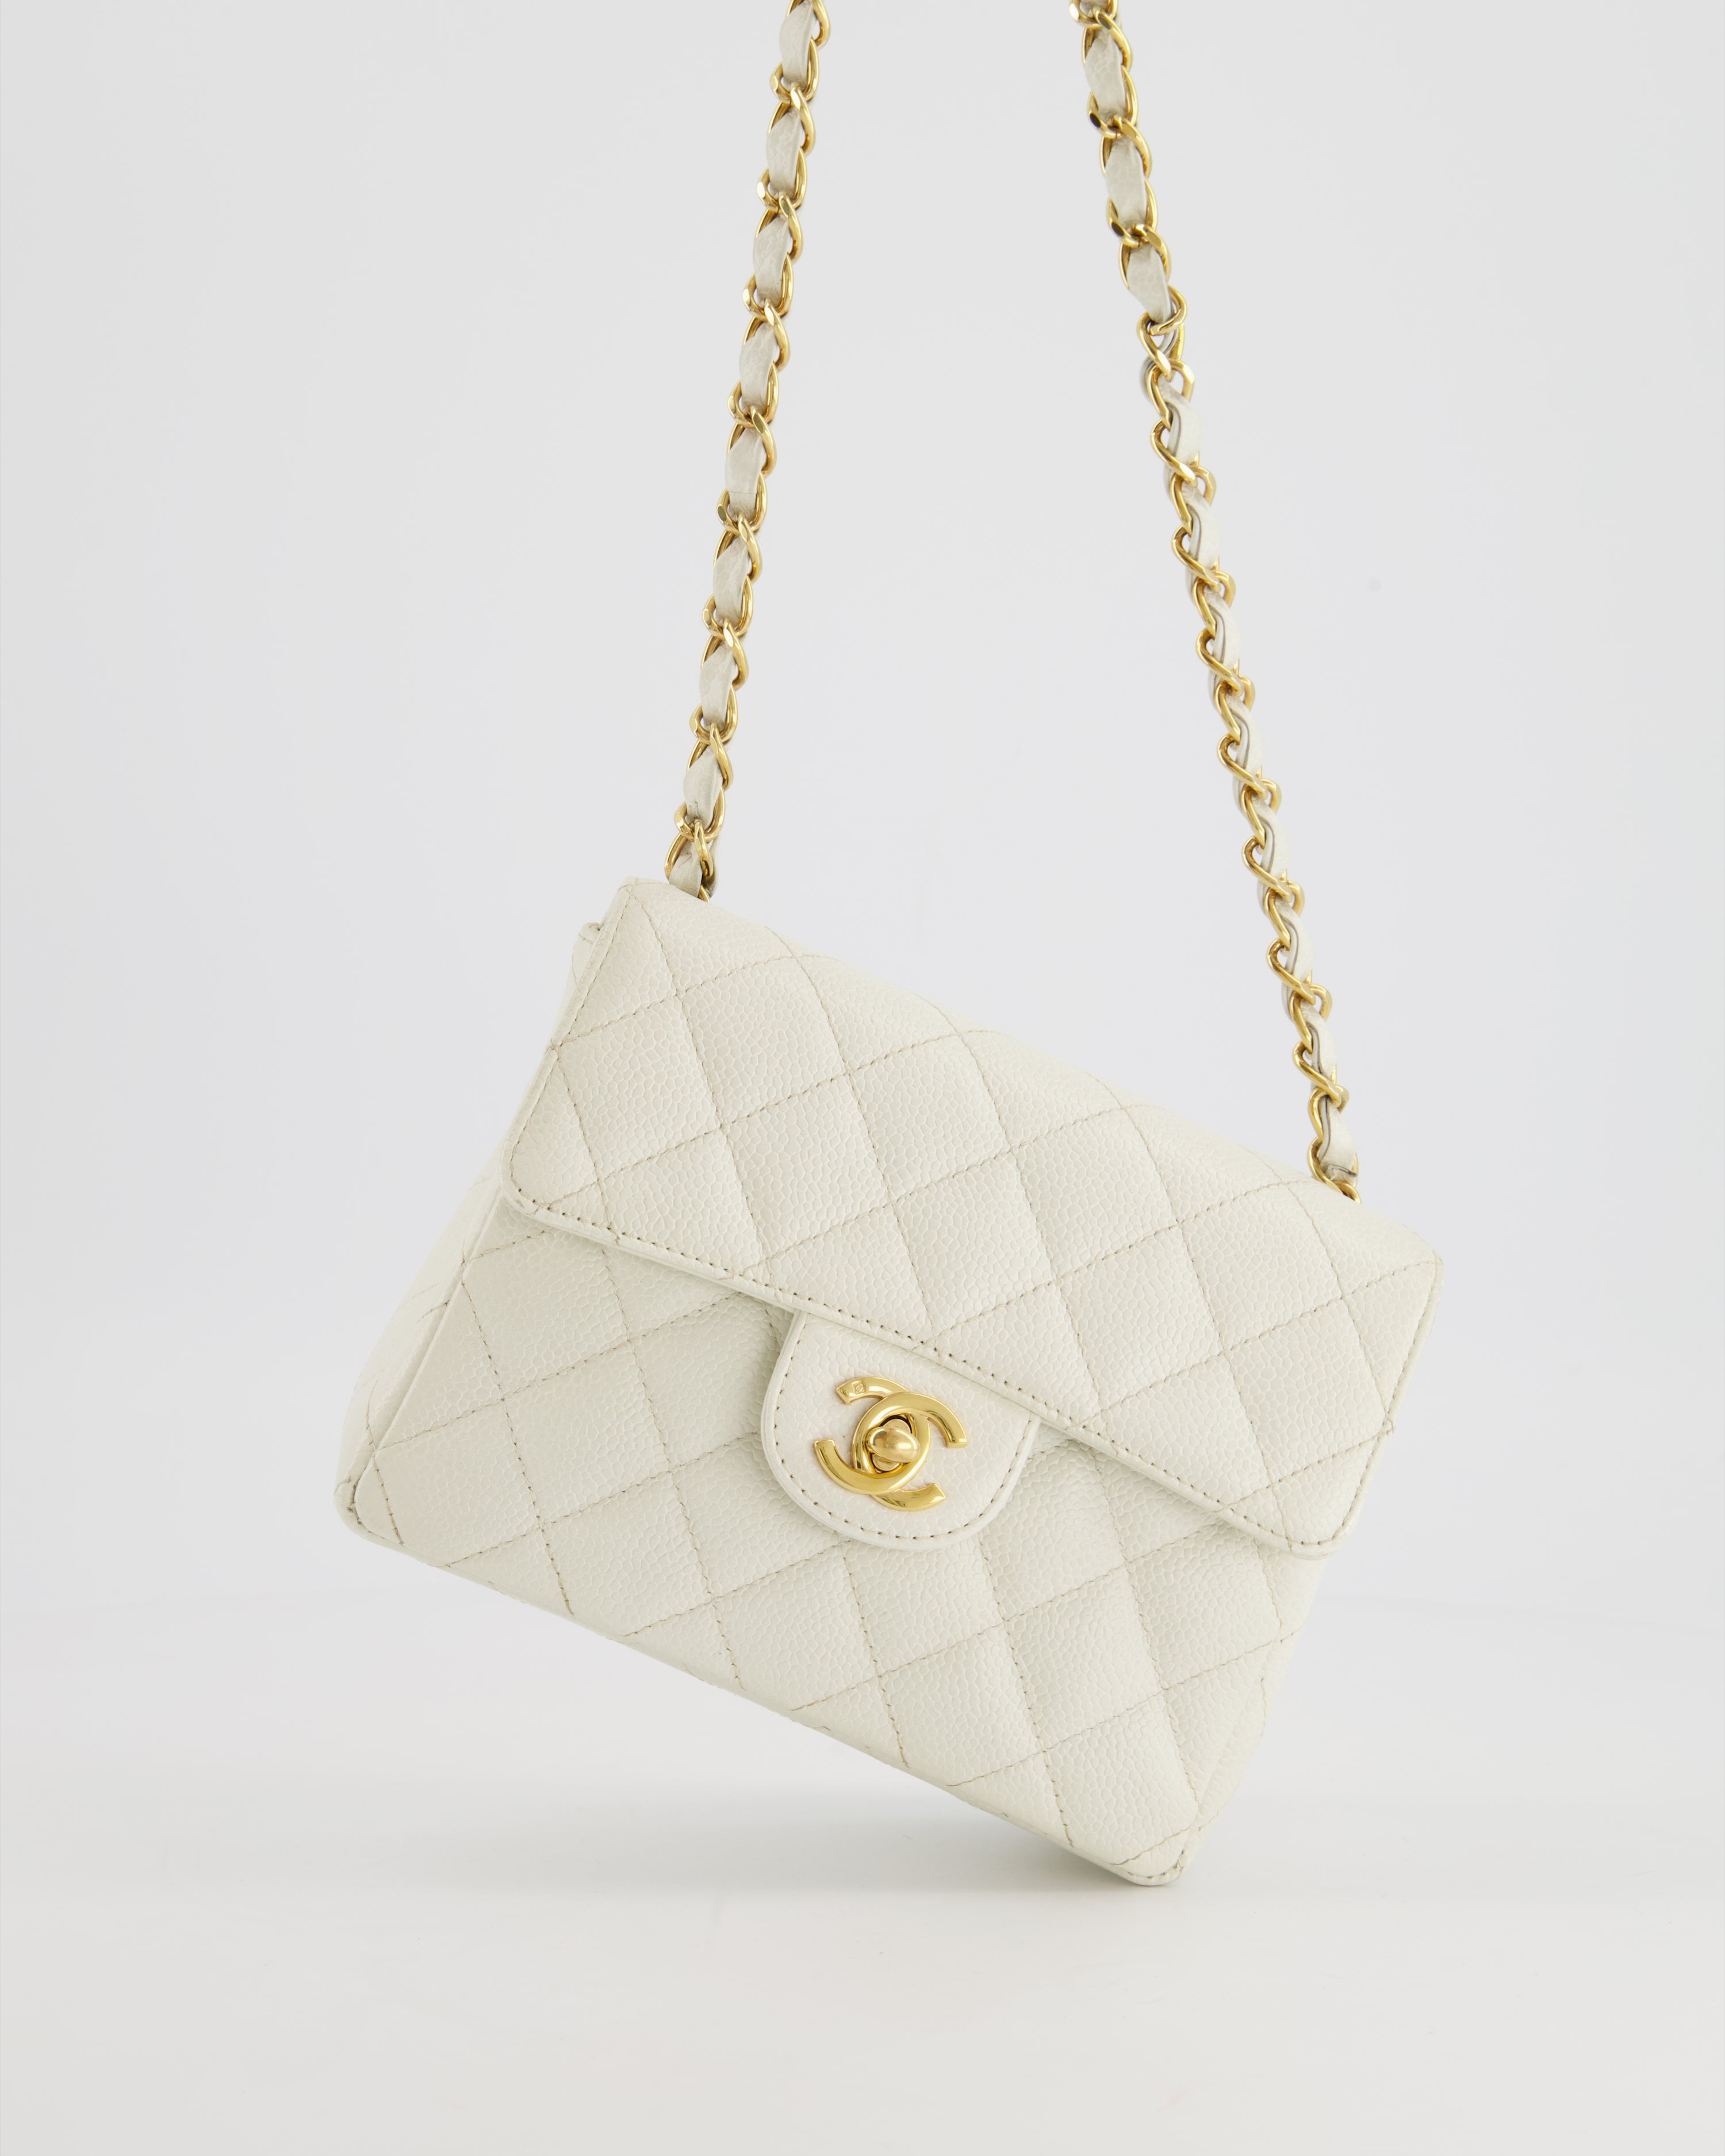 RARE* Chanel Vintage White Caviar Mini Square Flap Bag with 24K Gold –  Sellier